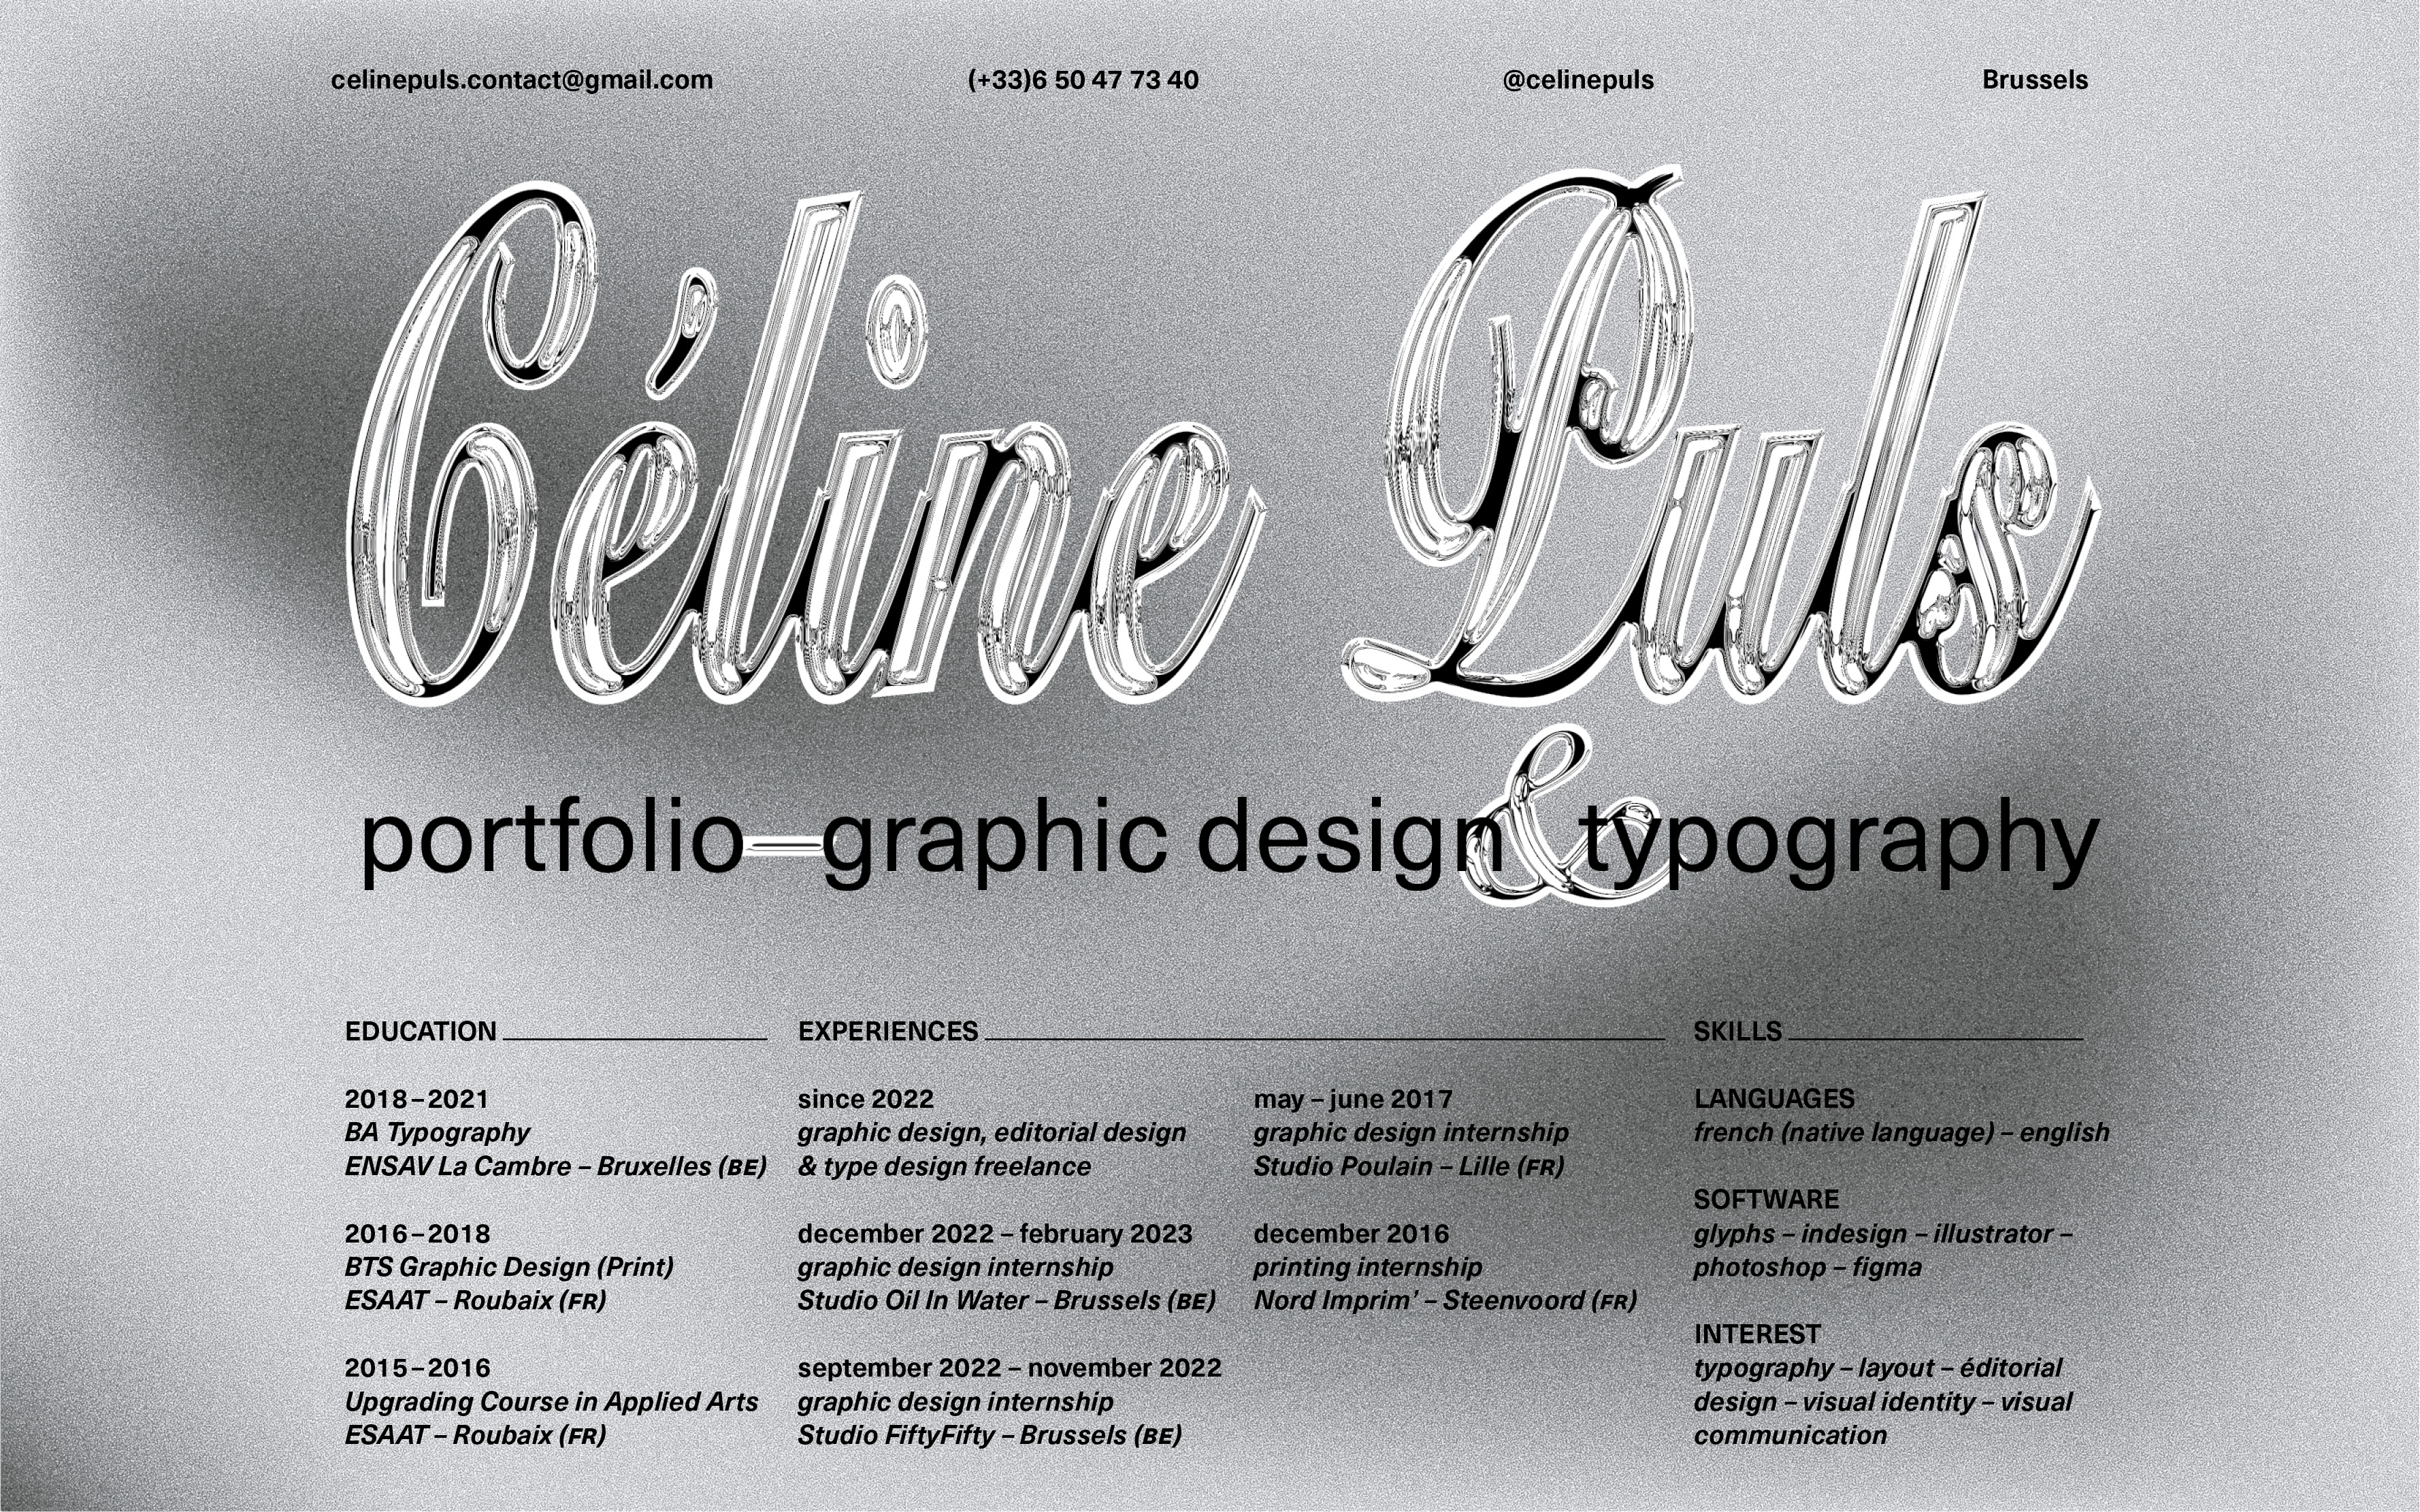 @celinepuls Brussels

EDUCATION

2018-2021
BA Typography graphic design, editor
ENSAV La Cambre - Bruxelles (BE) & type design freelanc

 

2016-2018
BTS Graphic Design (Print)
ESAAT - Roubaix (FR)

    
   
     
   

Studio Oil In Water
2015-2016 september 2022 - nove
Upgrading Course in Applied Arts graphic design internship

ESAAT - Roubaix (FR) Studio FiftyFifty - Brussels (BE) ommunication